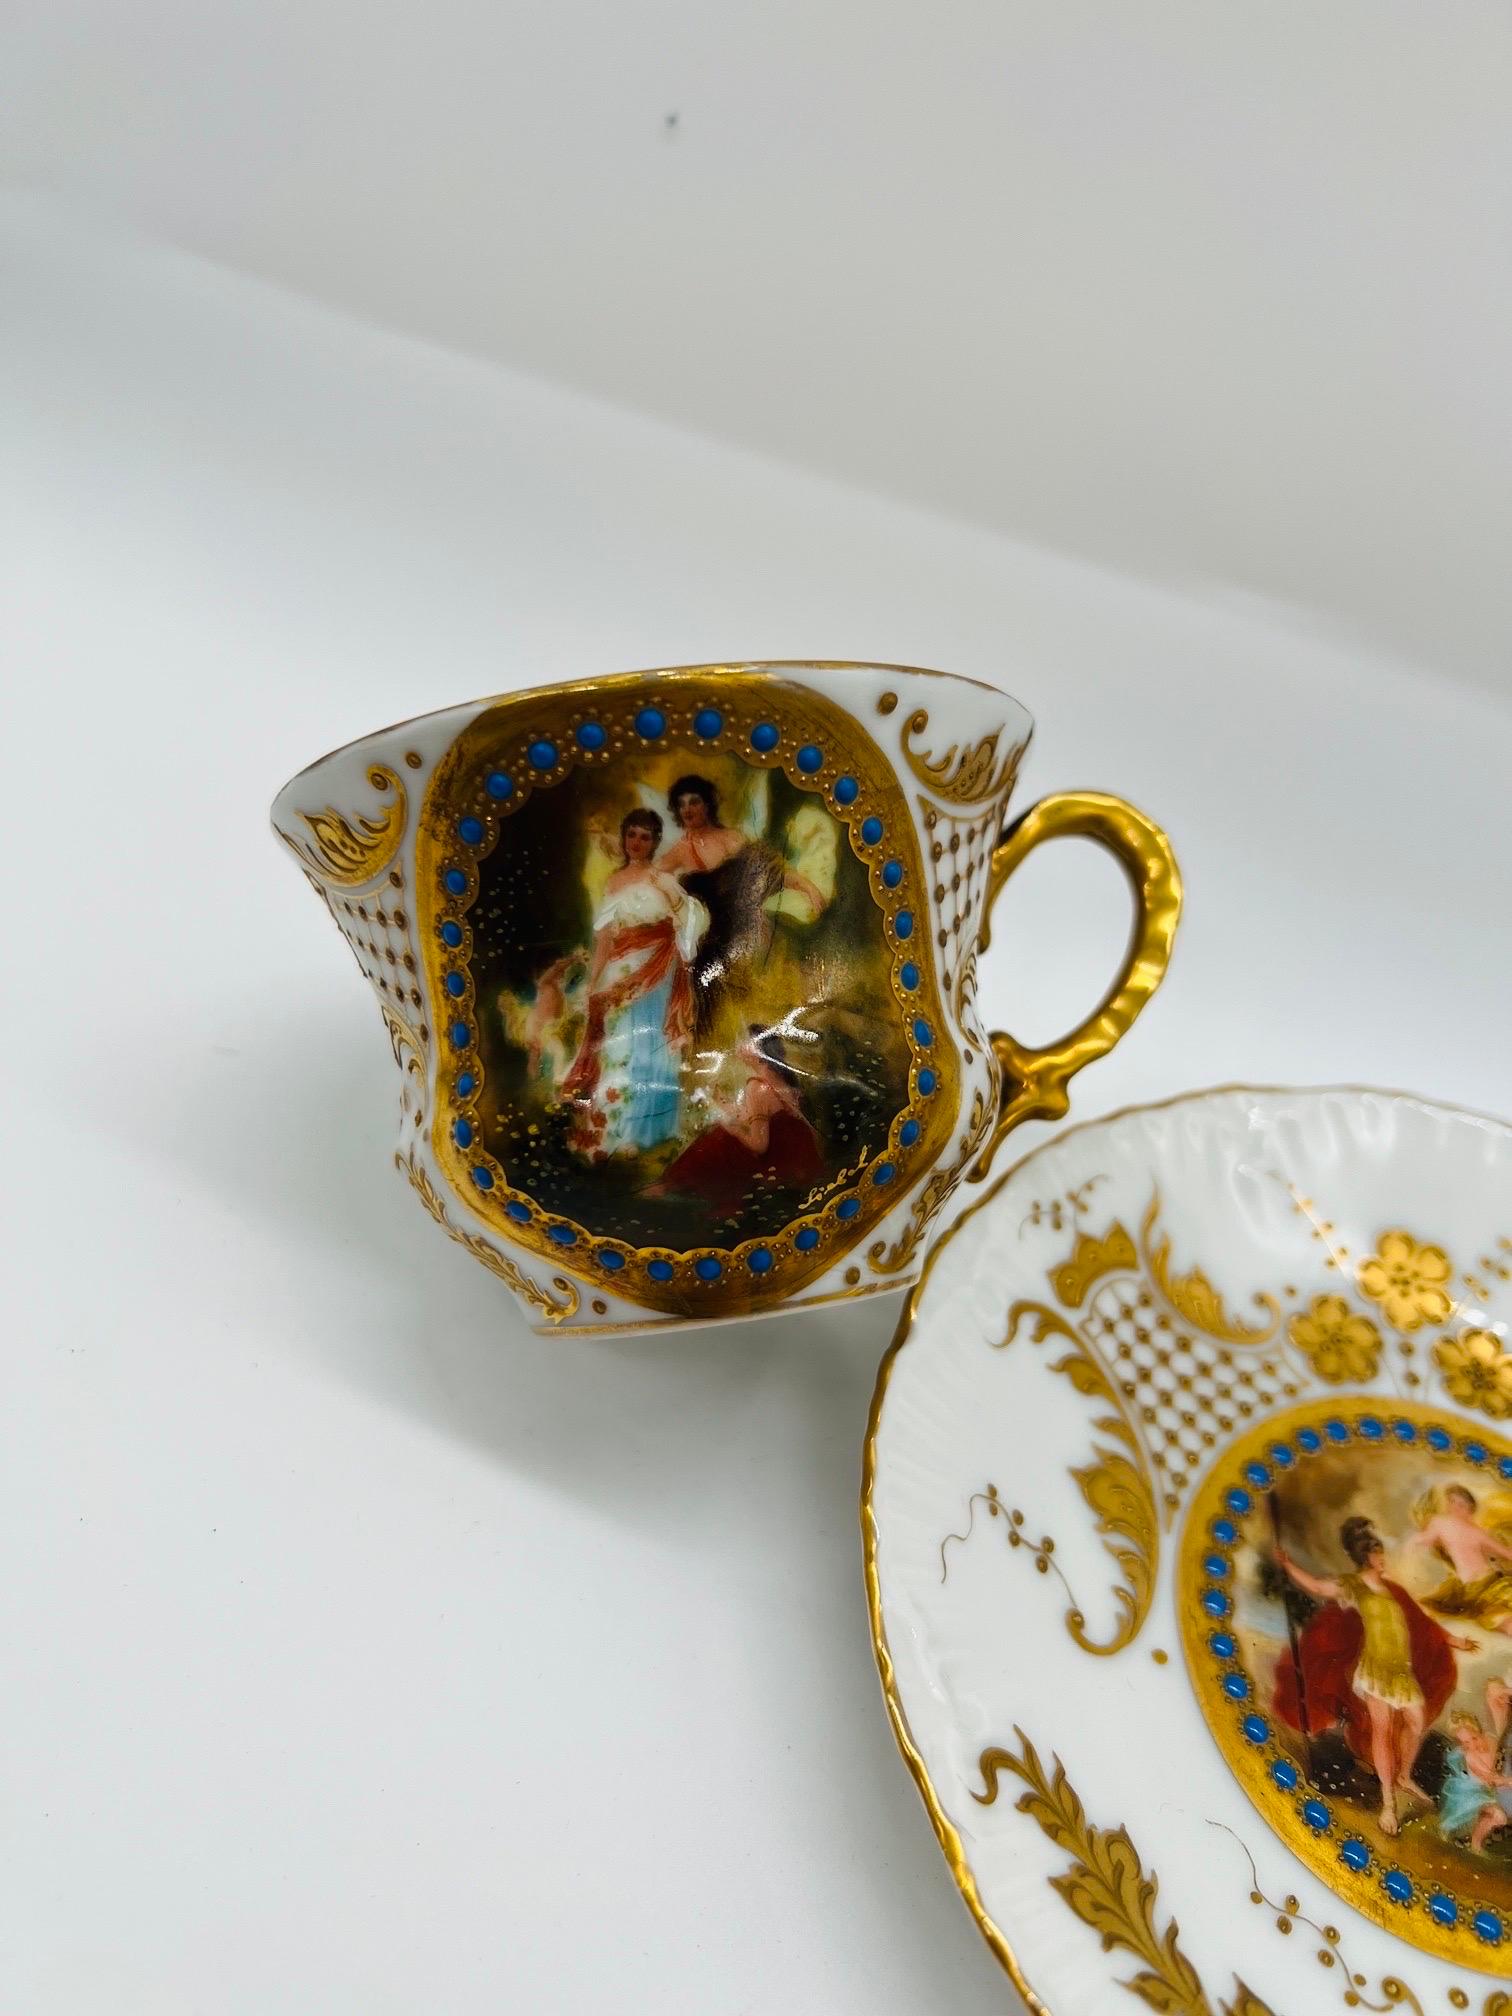 Royal Vienna Style Hand Painted Porcelain Teacup & Saucer. 
The cup and saucer are heavily decorated with raised enamel and gilding across the surface and showcase a scene of 3 ladies. Interior heavily gilt. Underside marked.